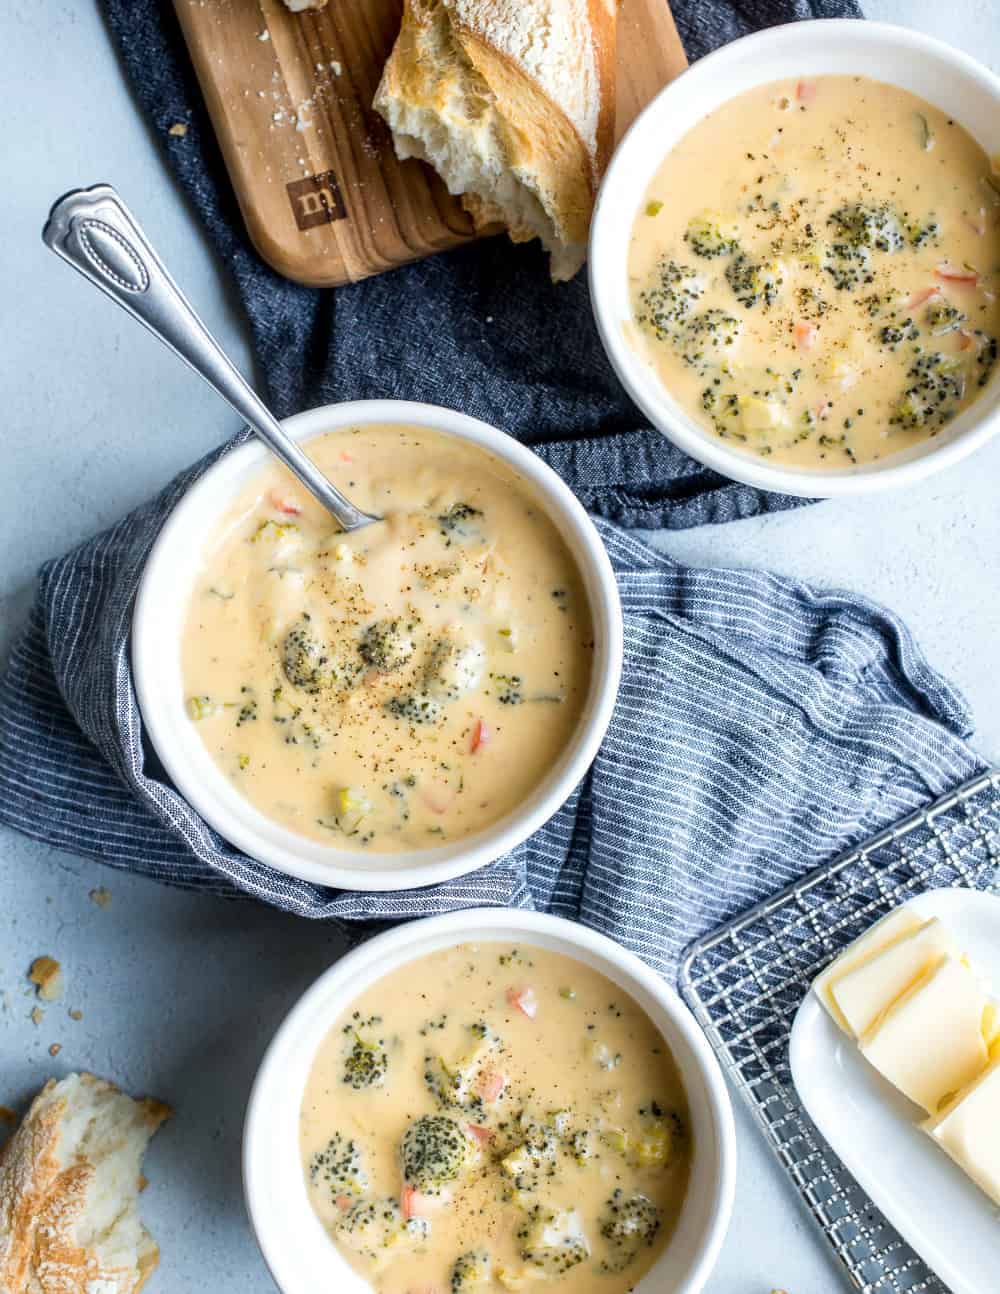 Bowls of broccoli cheese soup arranged next to bread and butter